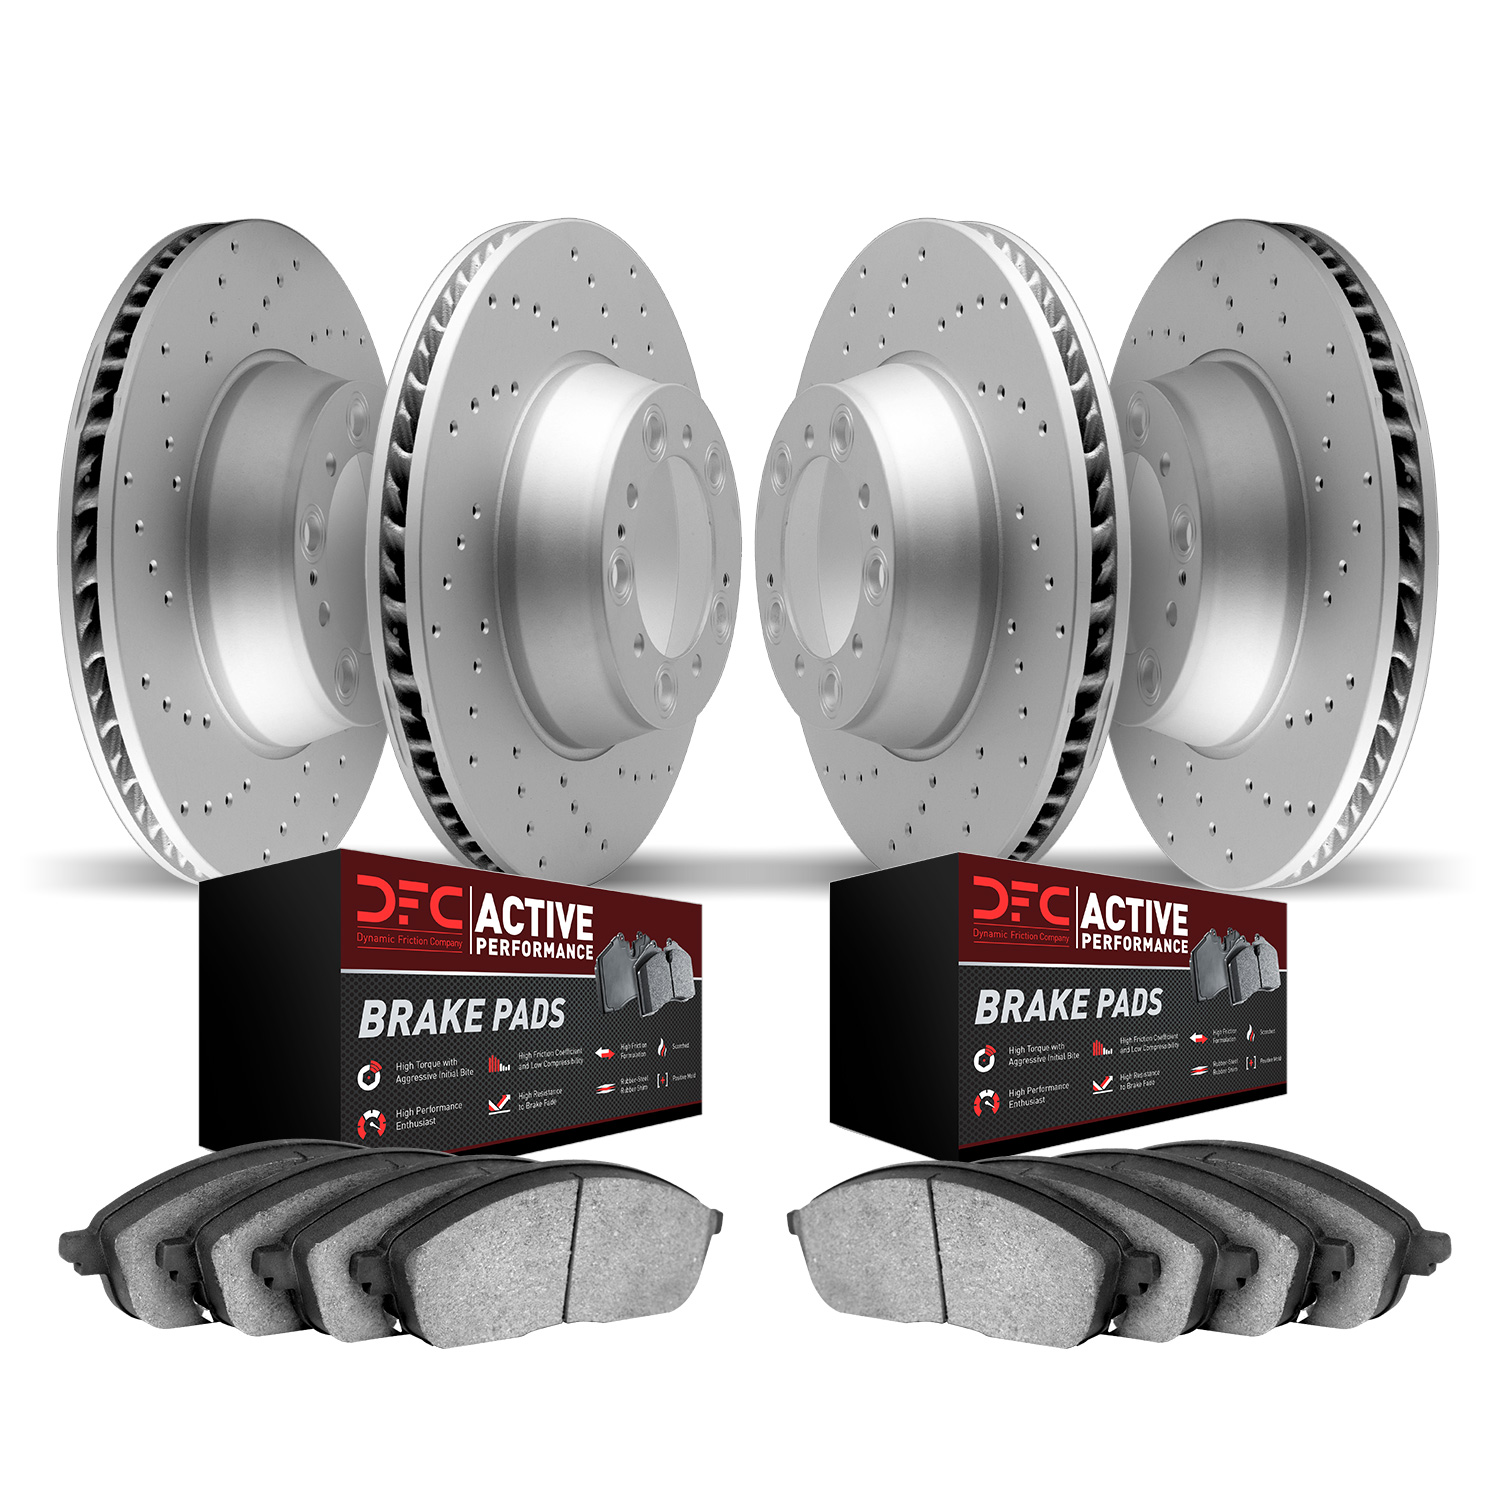 2704-31030 Geoperformance Drilled Brake Rotors with Active Performance Pads Kit, 2000-2003 BMW, Position: Front and Rear